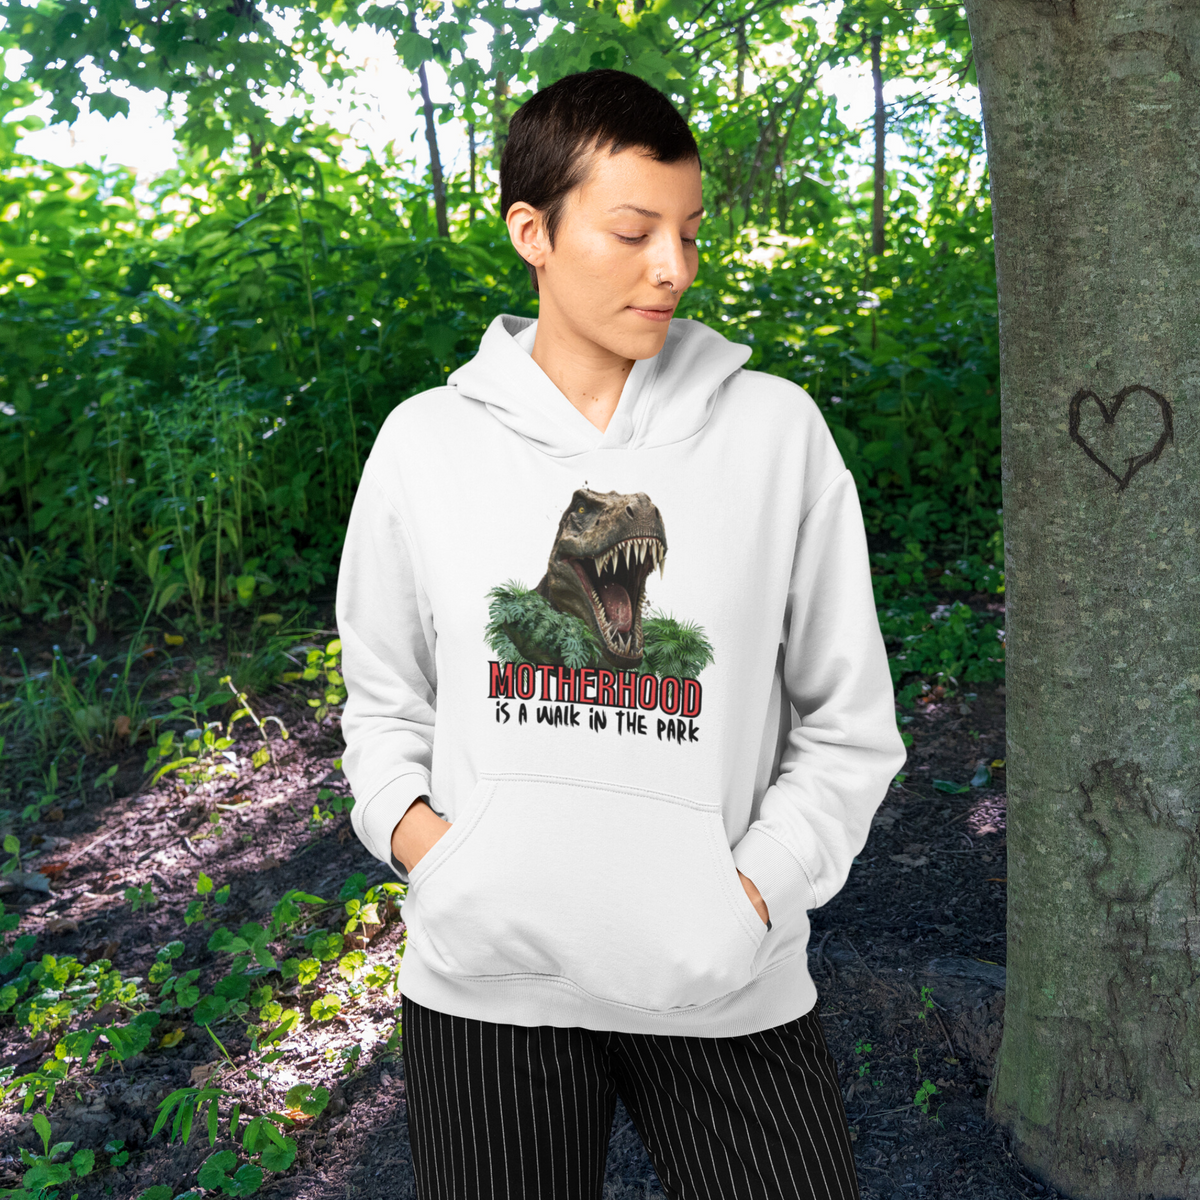 hoodie, dinosaur, motherhood, parenting, family, mom life, cozy wear, humorous design, mother's day, mom gift, soft fabric, light-hearted phrase, casual style, warmth, versatile, comfort, strength, adventure, mom pride, laughter, fashion, quality, durability, motherhood its a walk in the park tee